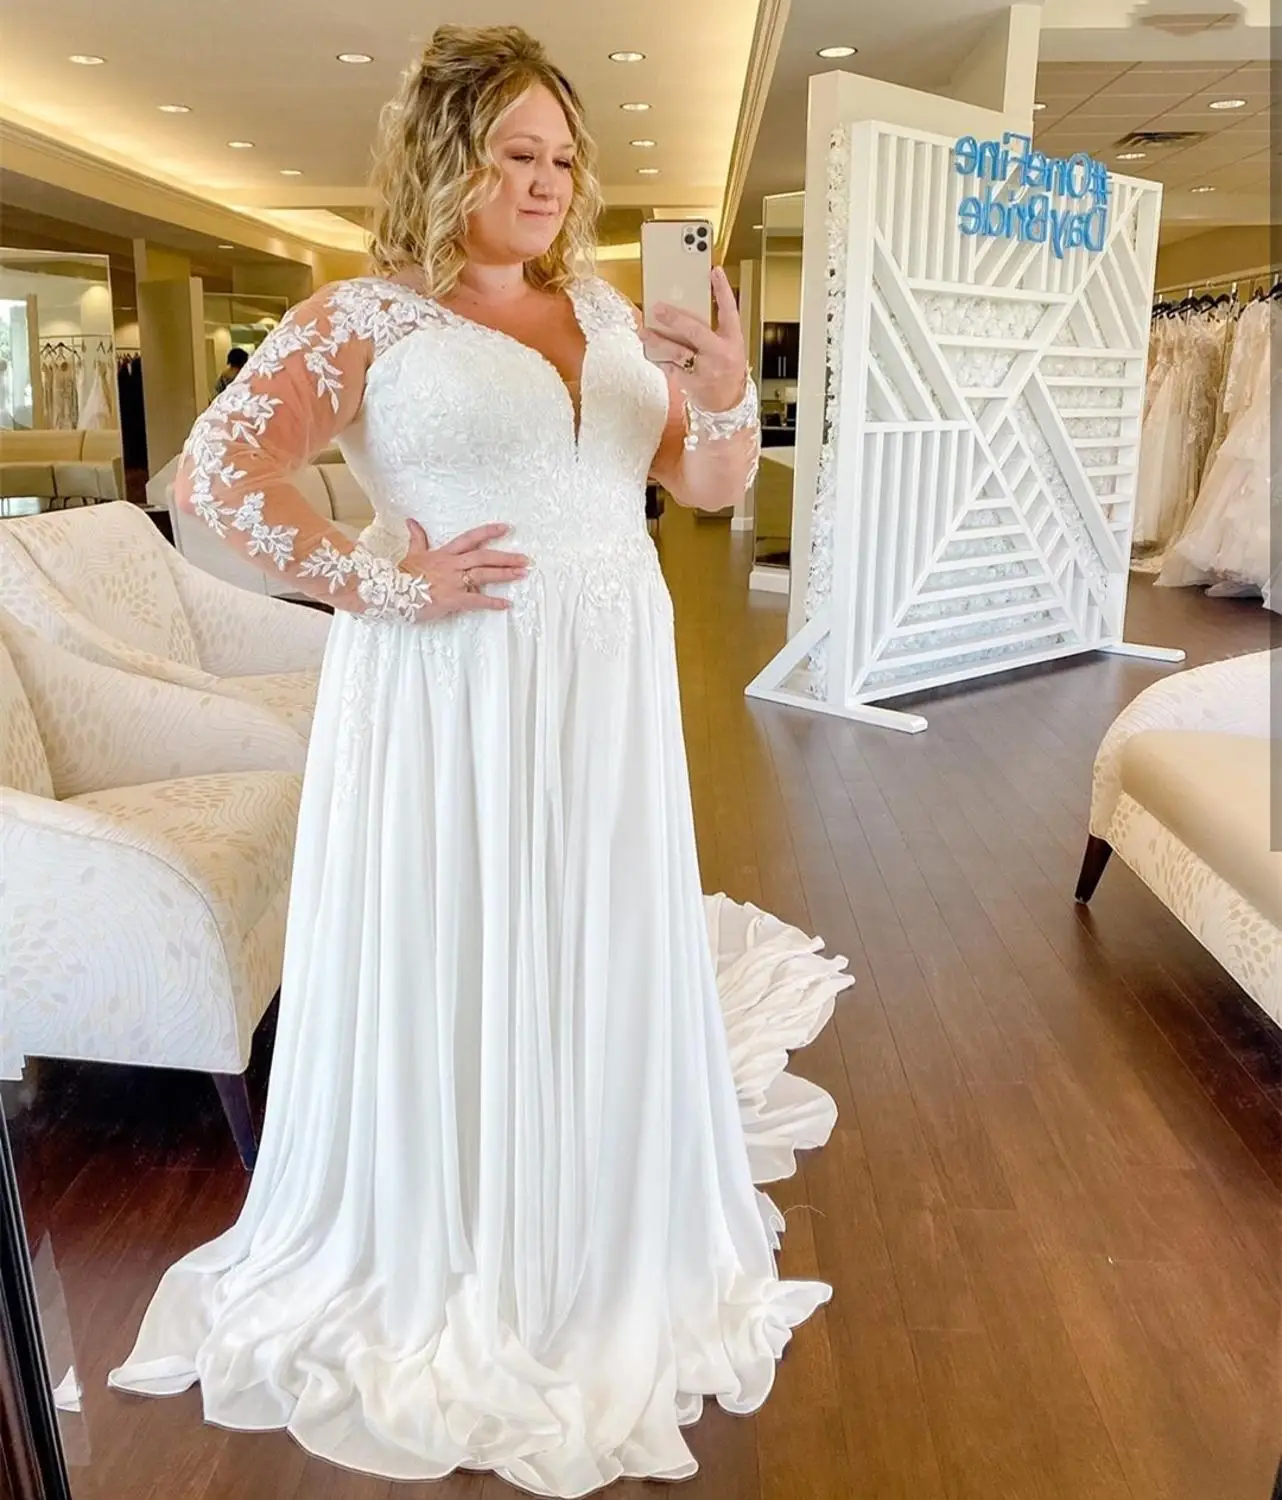 Plus Size Wedding Gowns with Long Trains